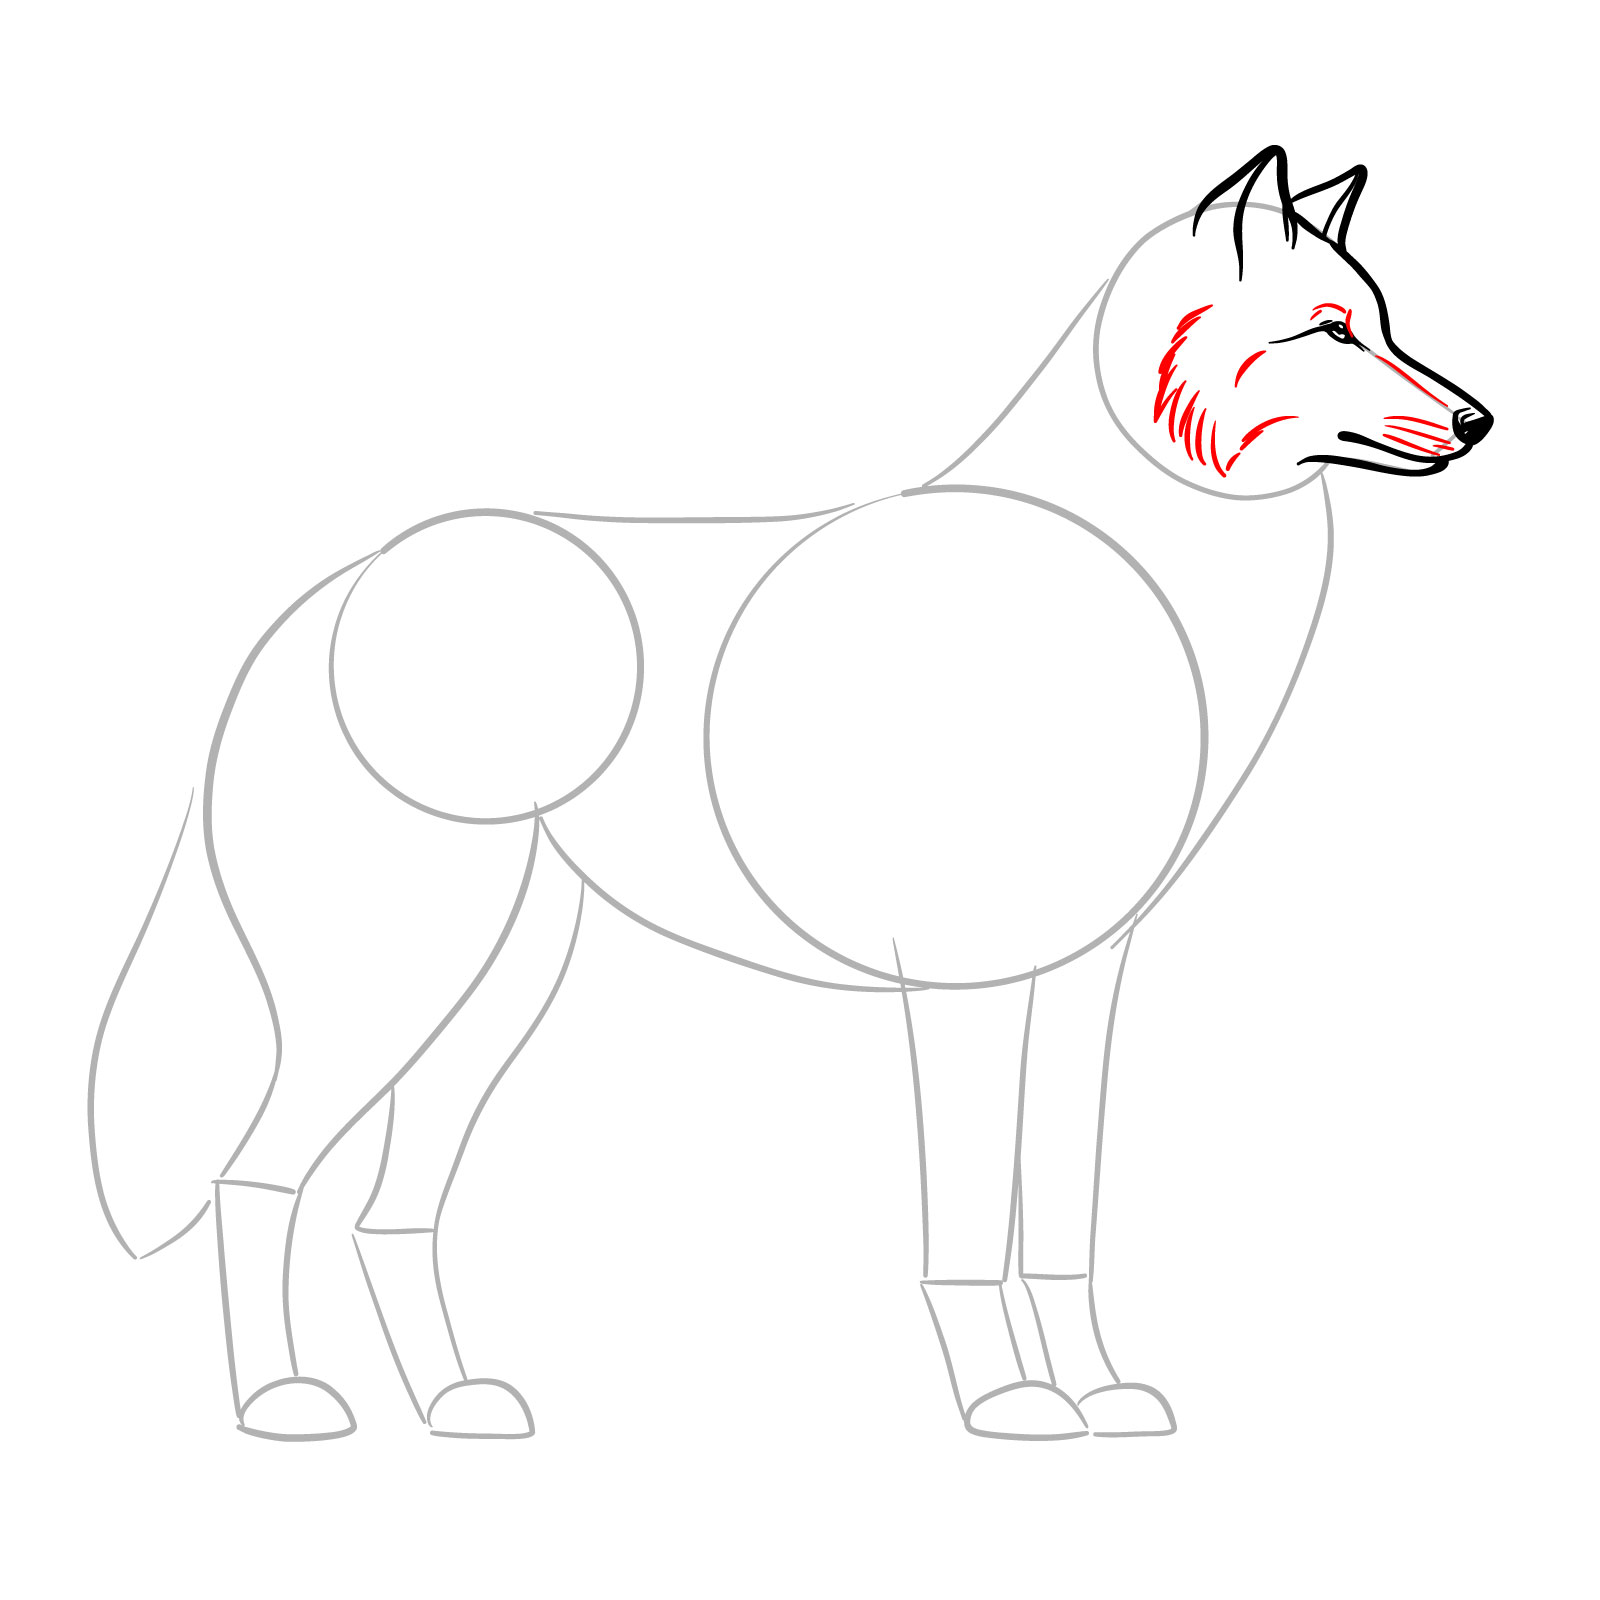 Final details and textures added to a wolf side view drawing guide - step 07